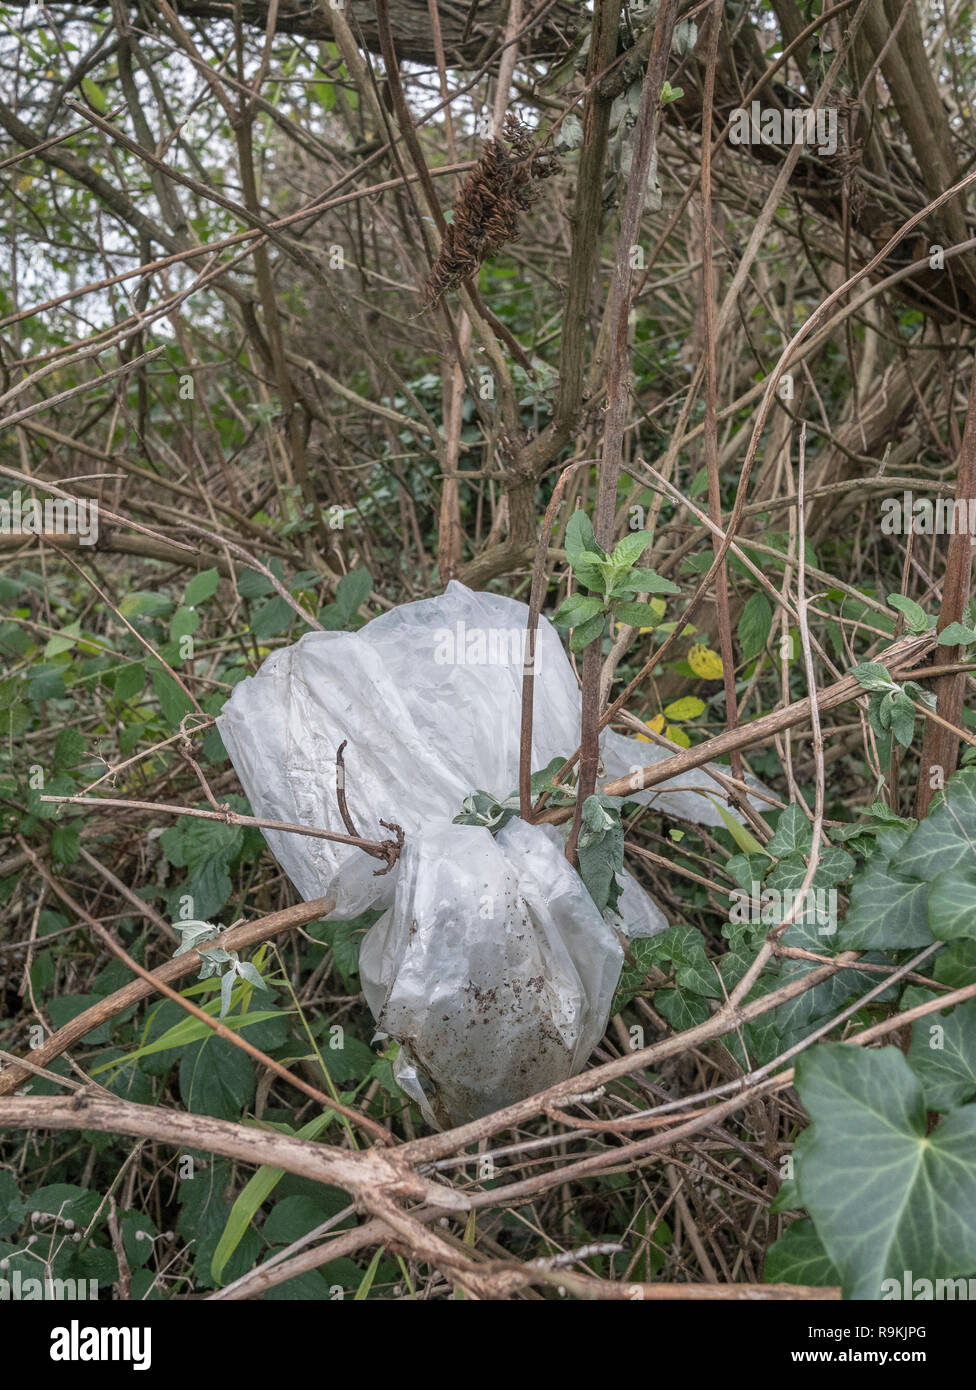 Plastic sheet discarded in rural hedgerow. Metaphor plastic pollution, environmental pollution, war on plastic waste, plastic rubbish. Stock Photo